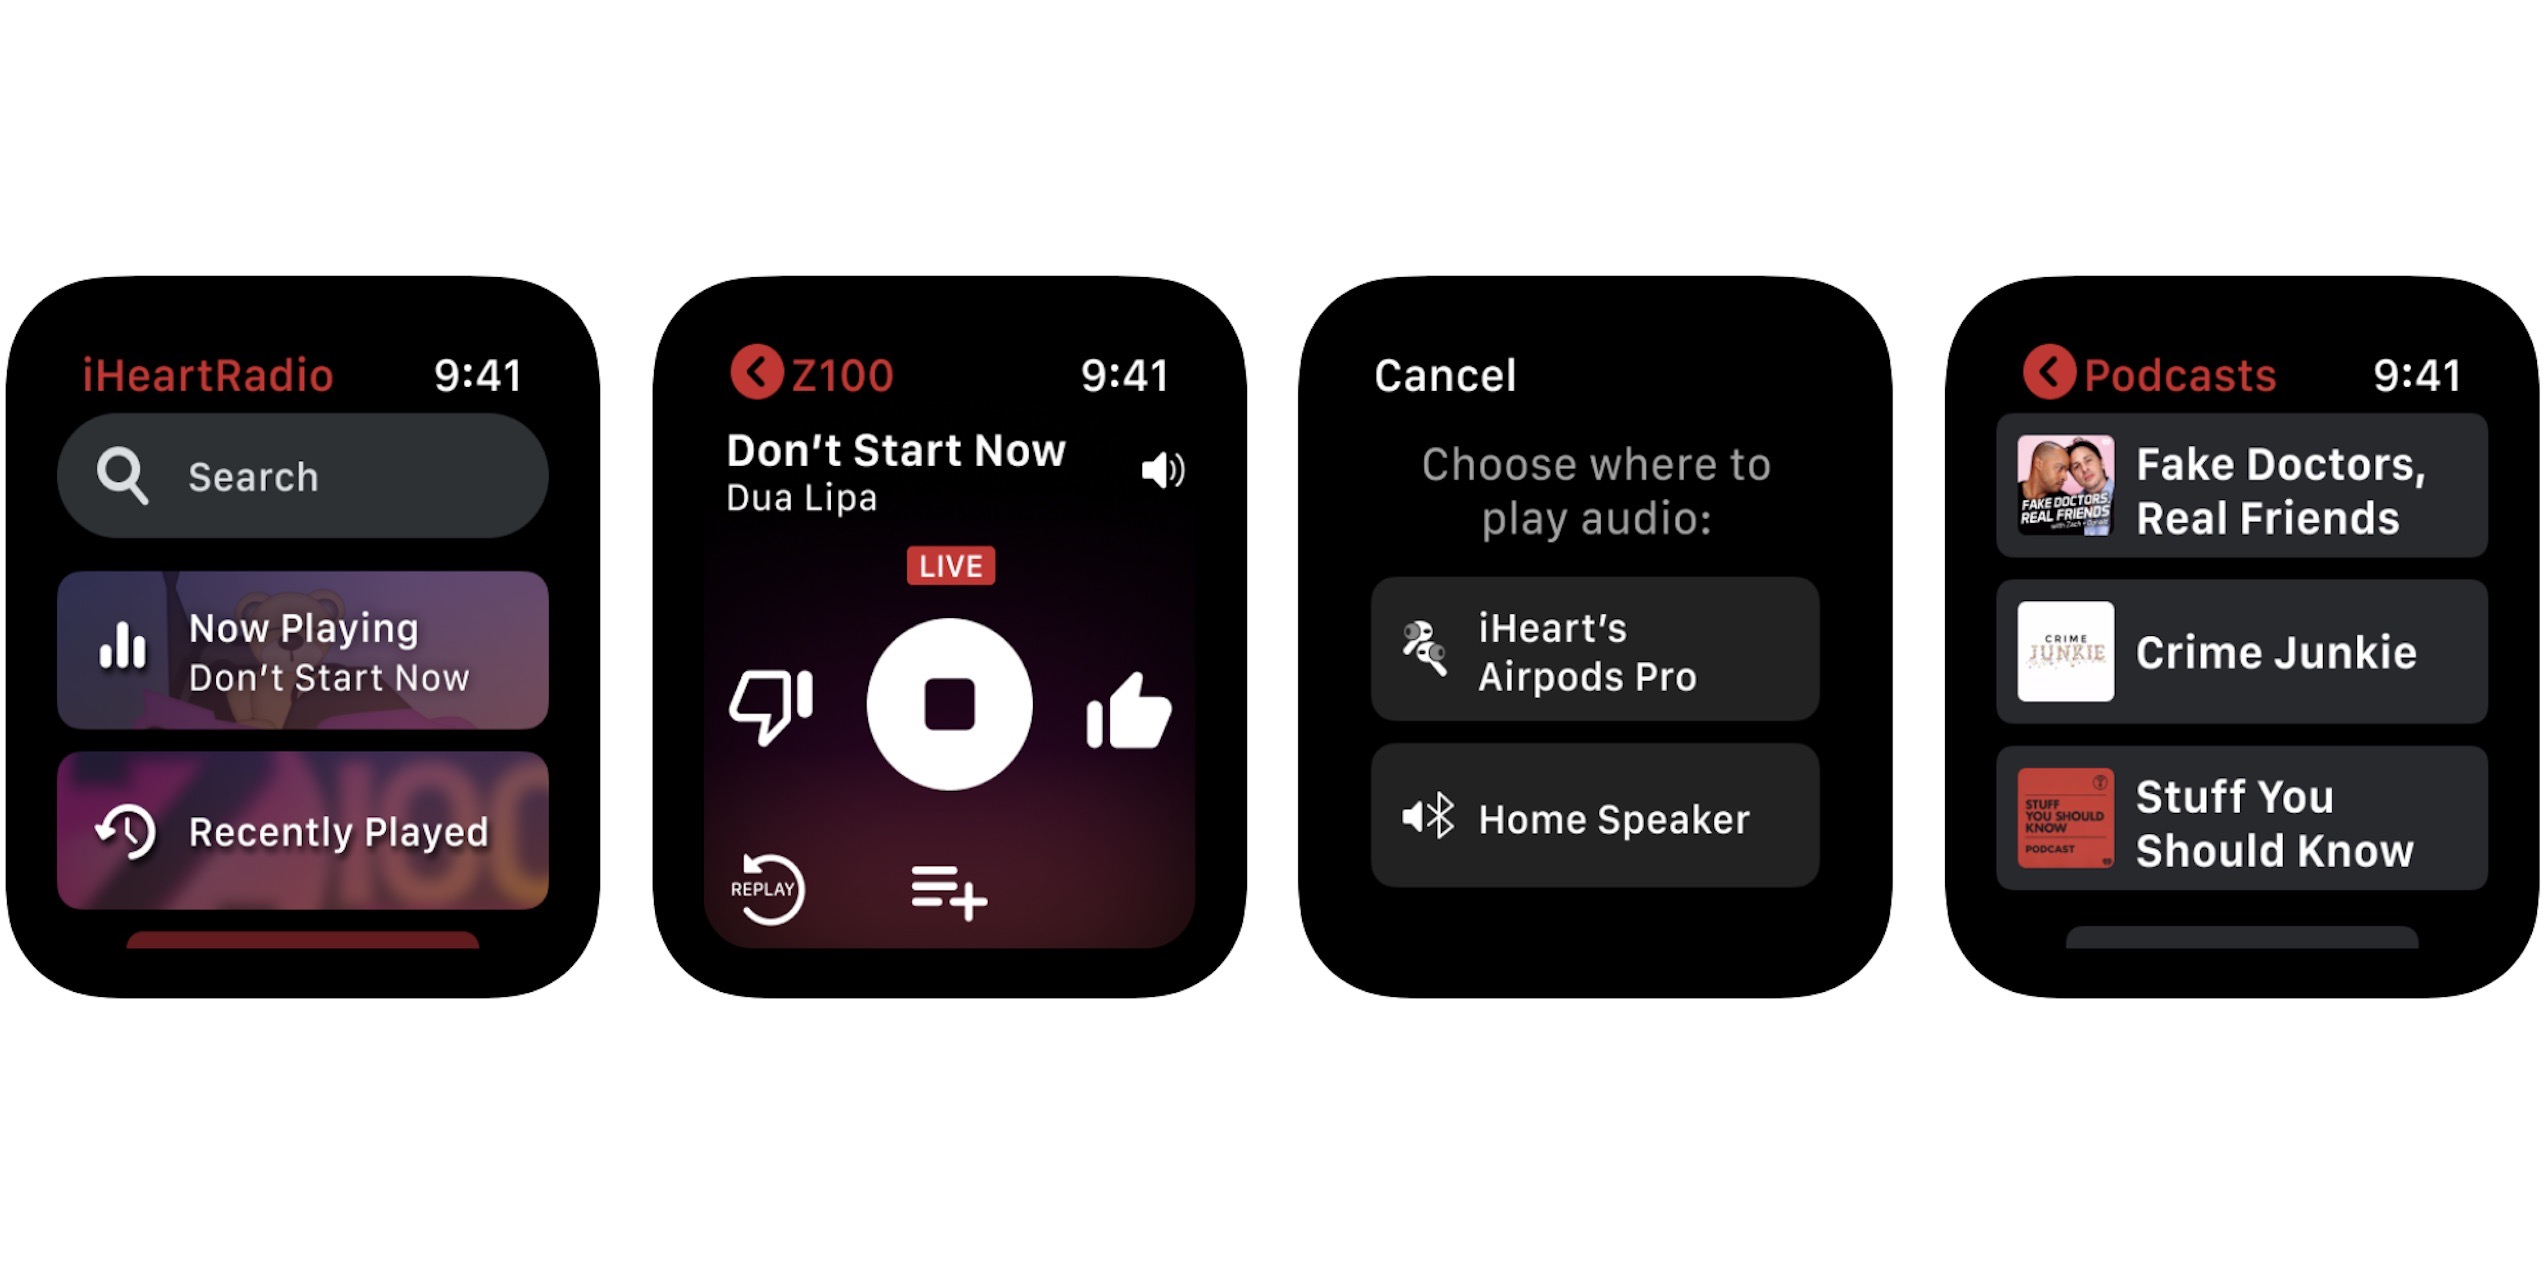 https://9to5mac.com/wp-content/uploads/sites/6/2020/09/iheart-radio-apple-watch-app-streaming-support.jpeg?quality=82&strip=all